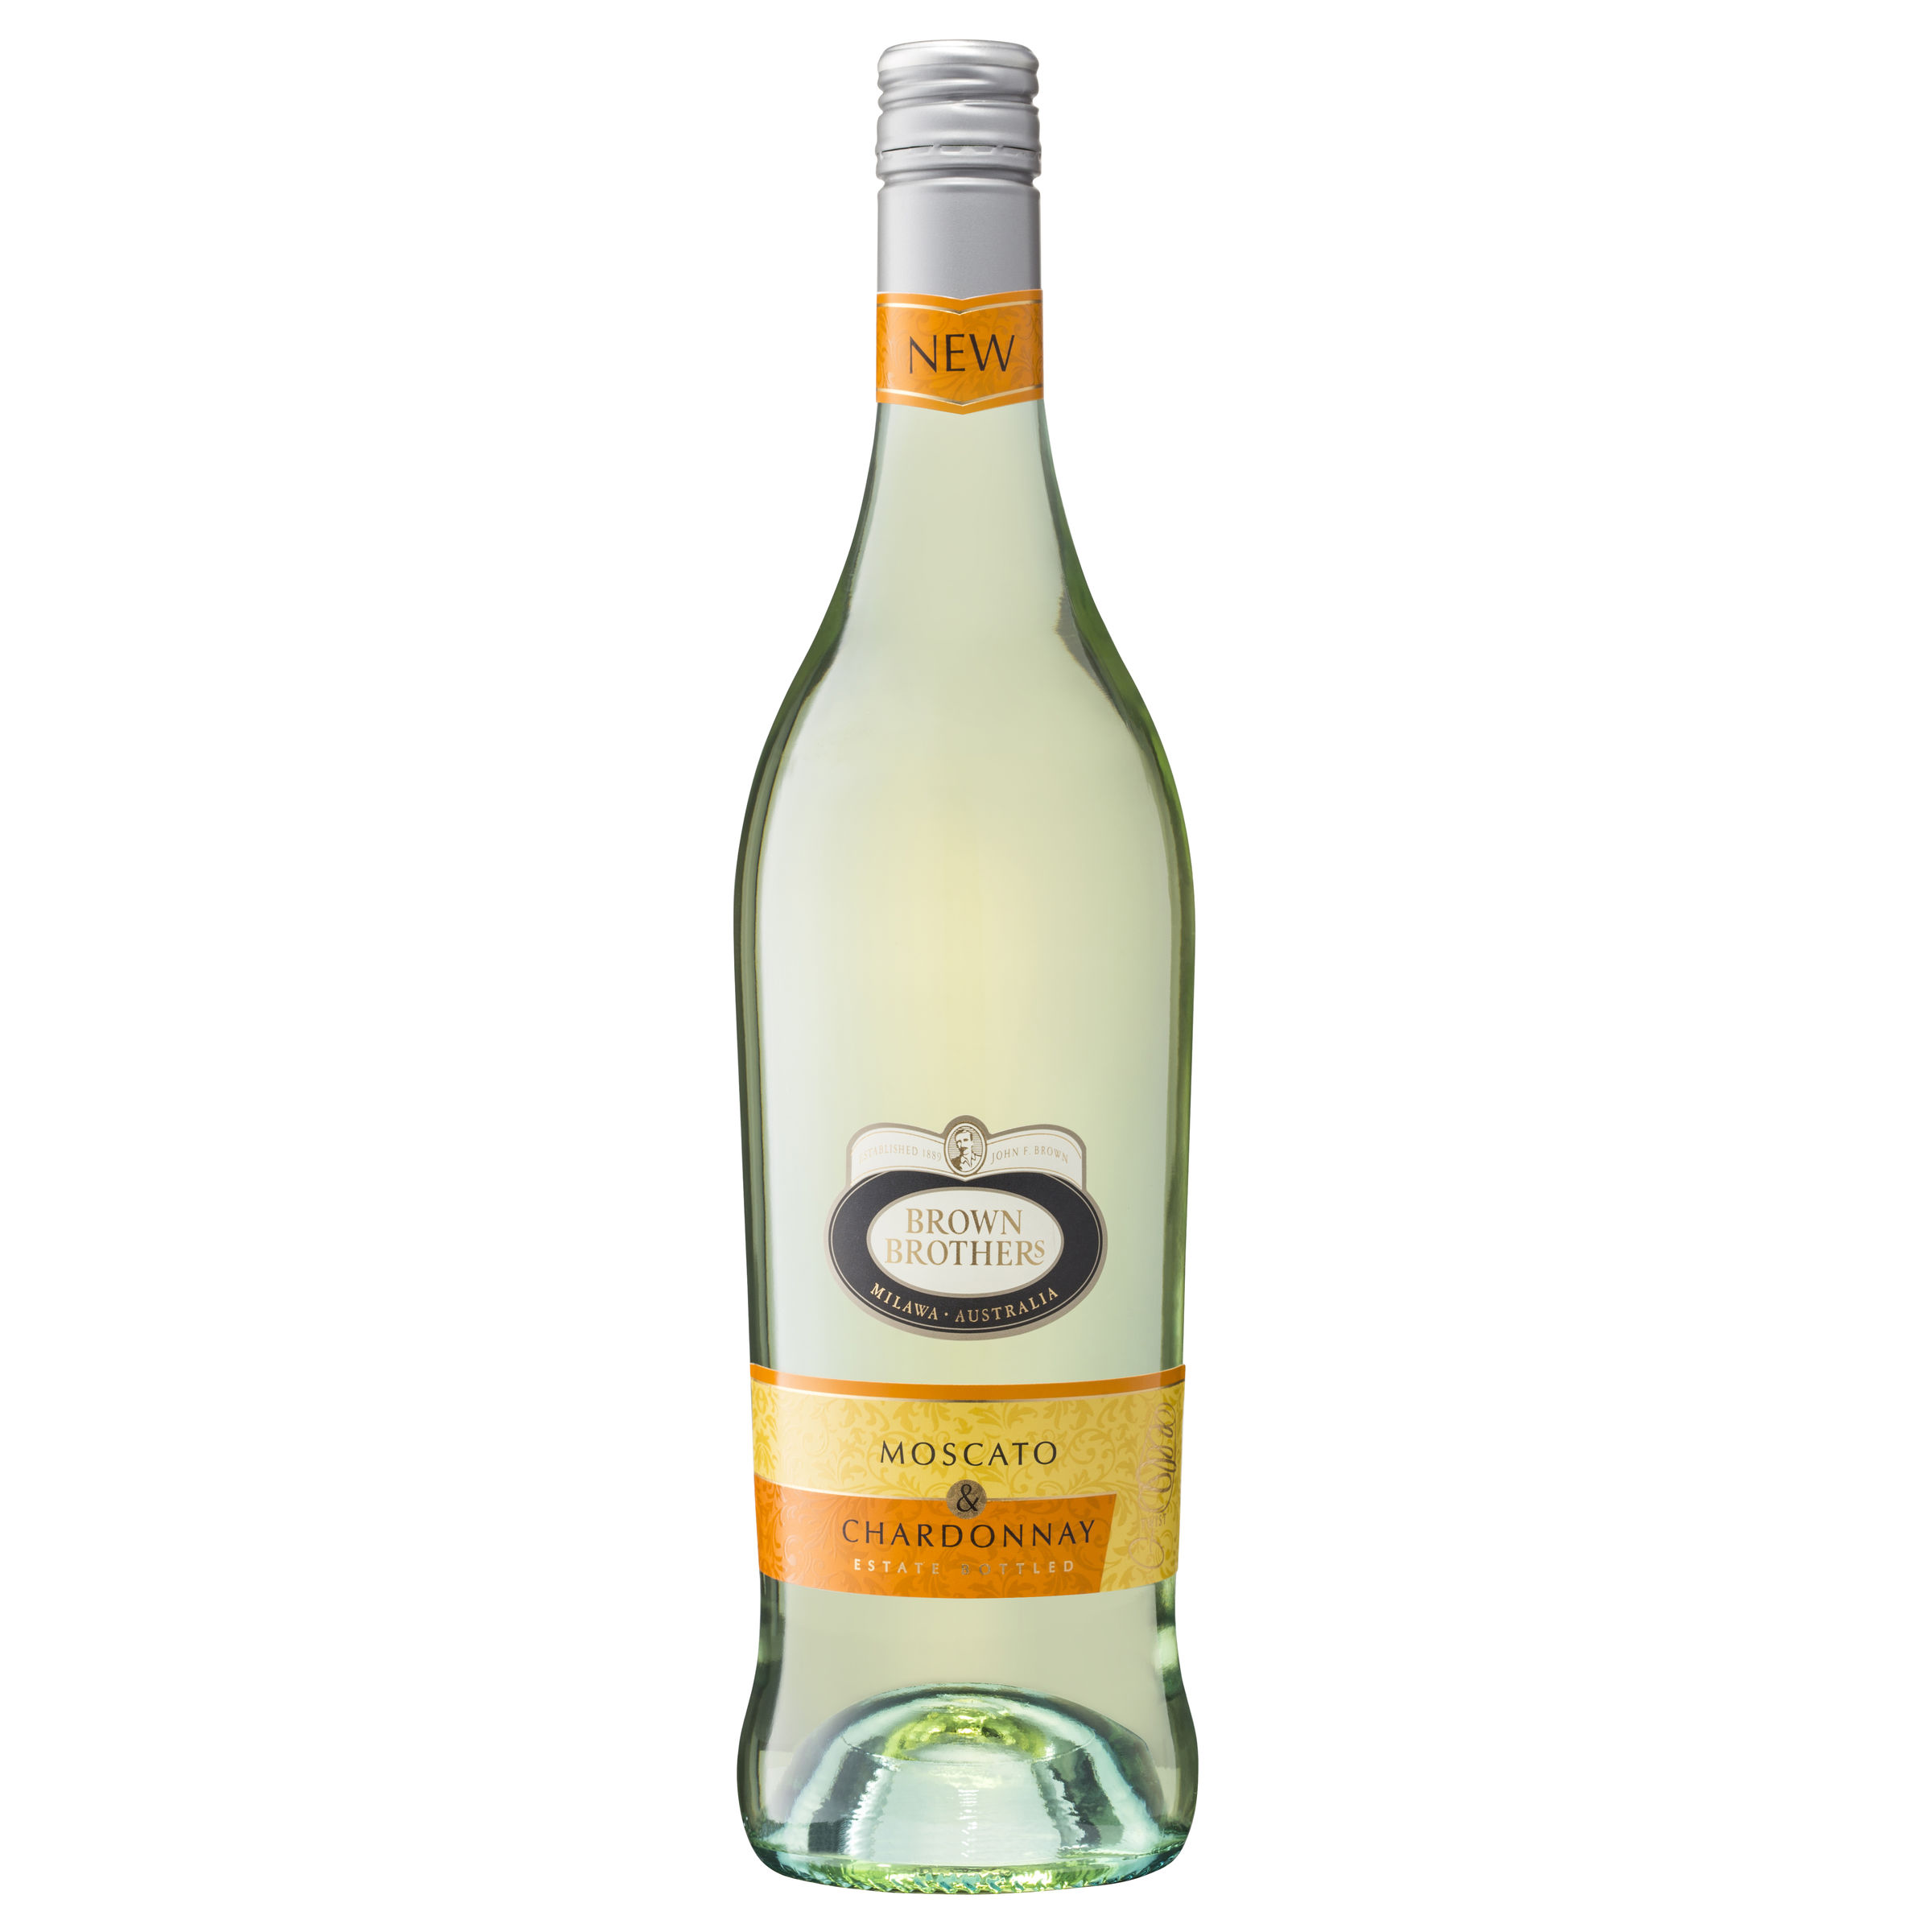 Brown brothers white wine